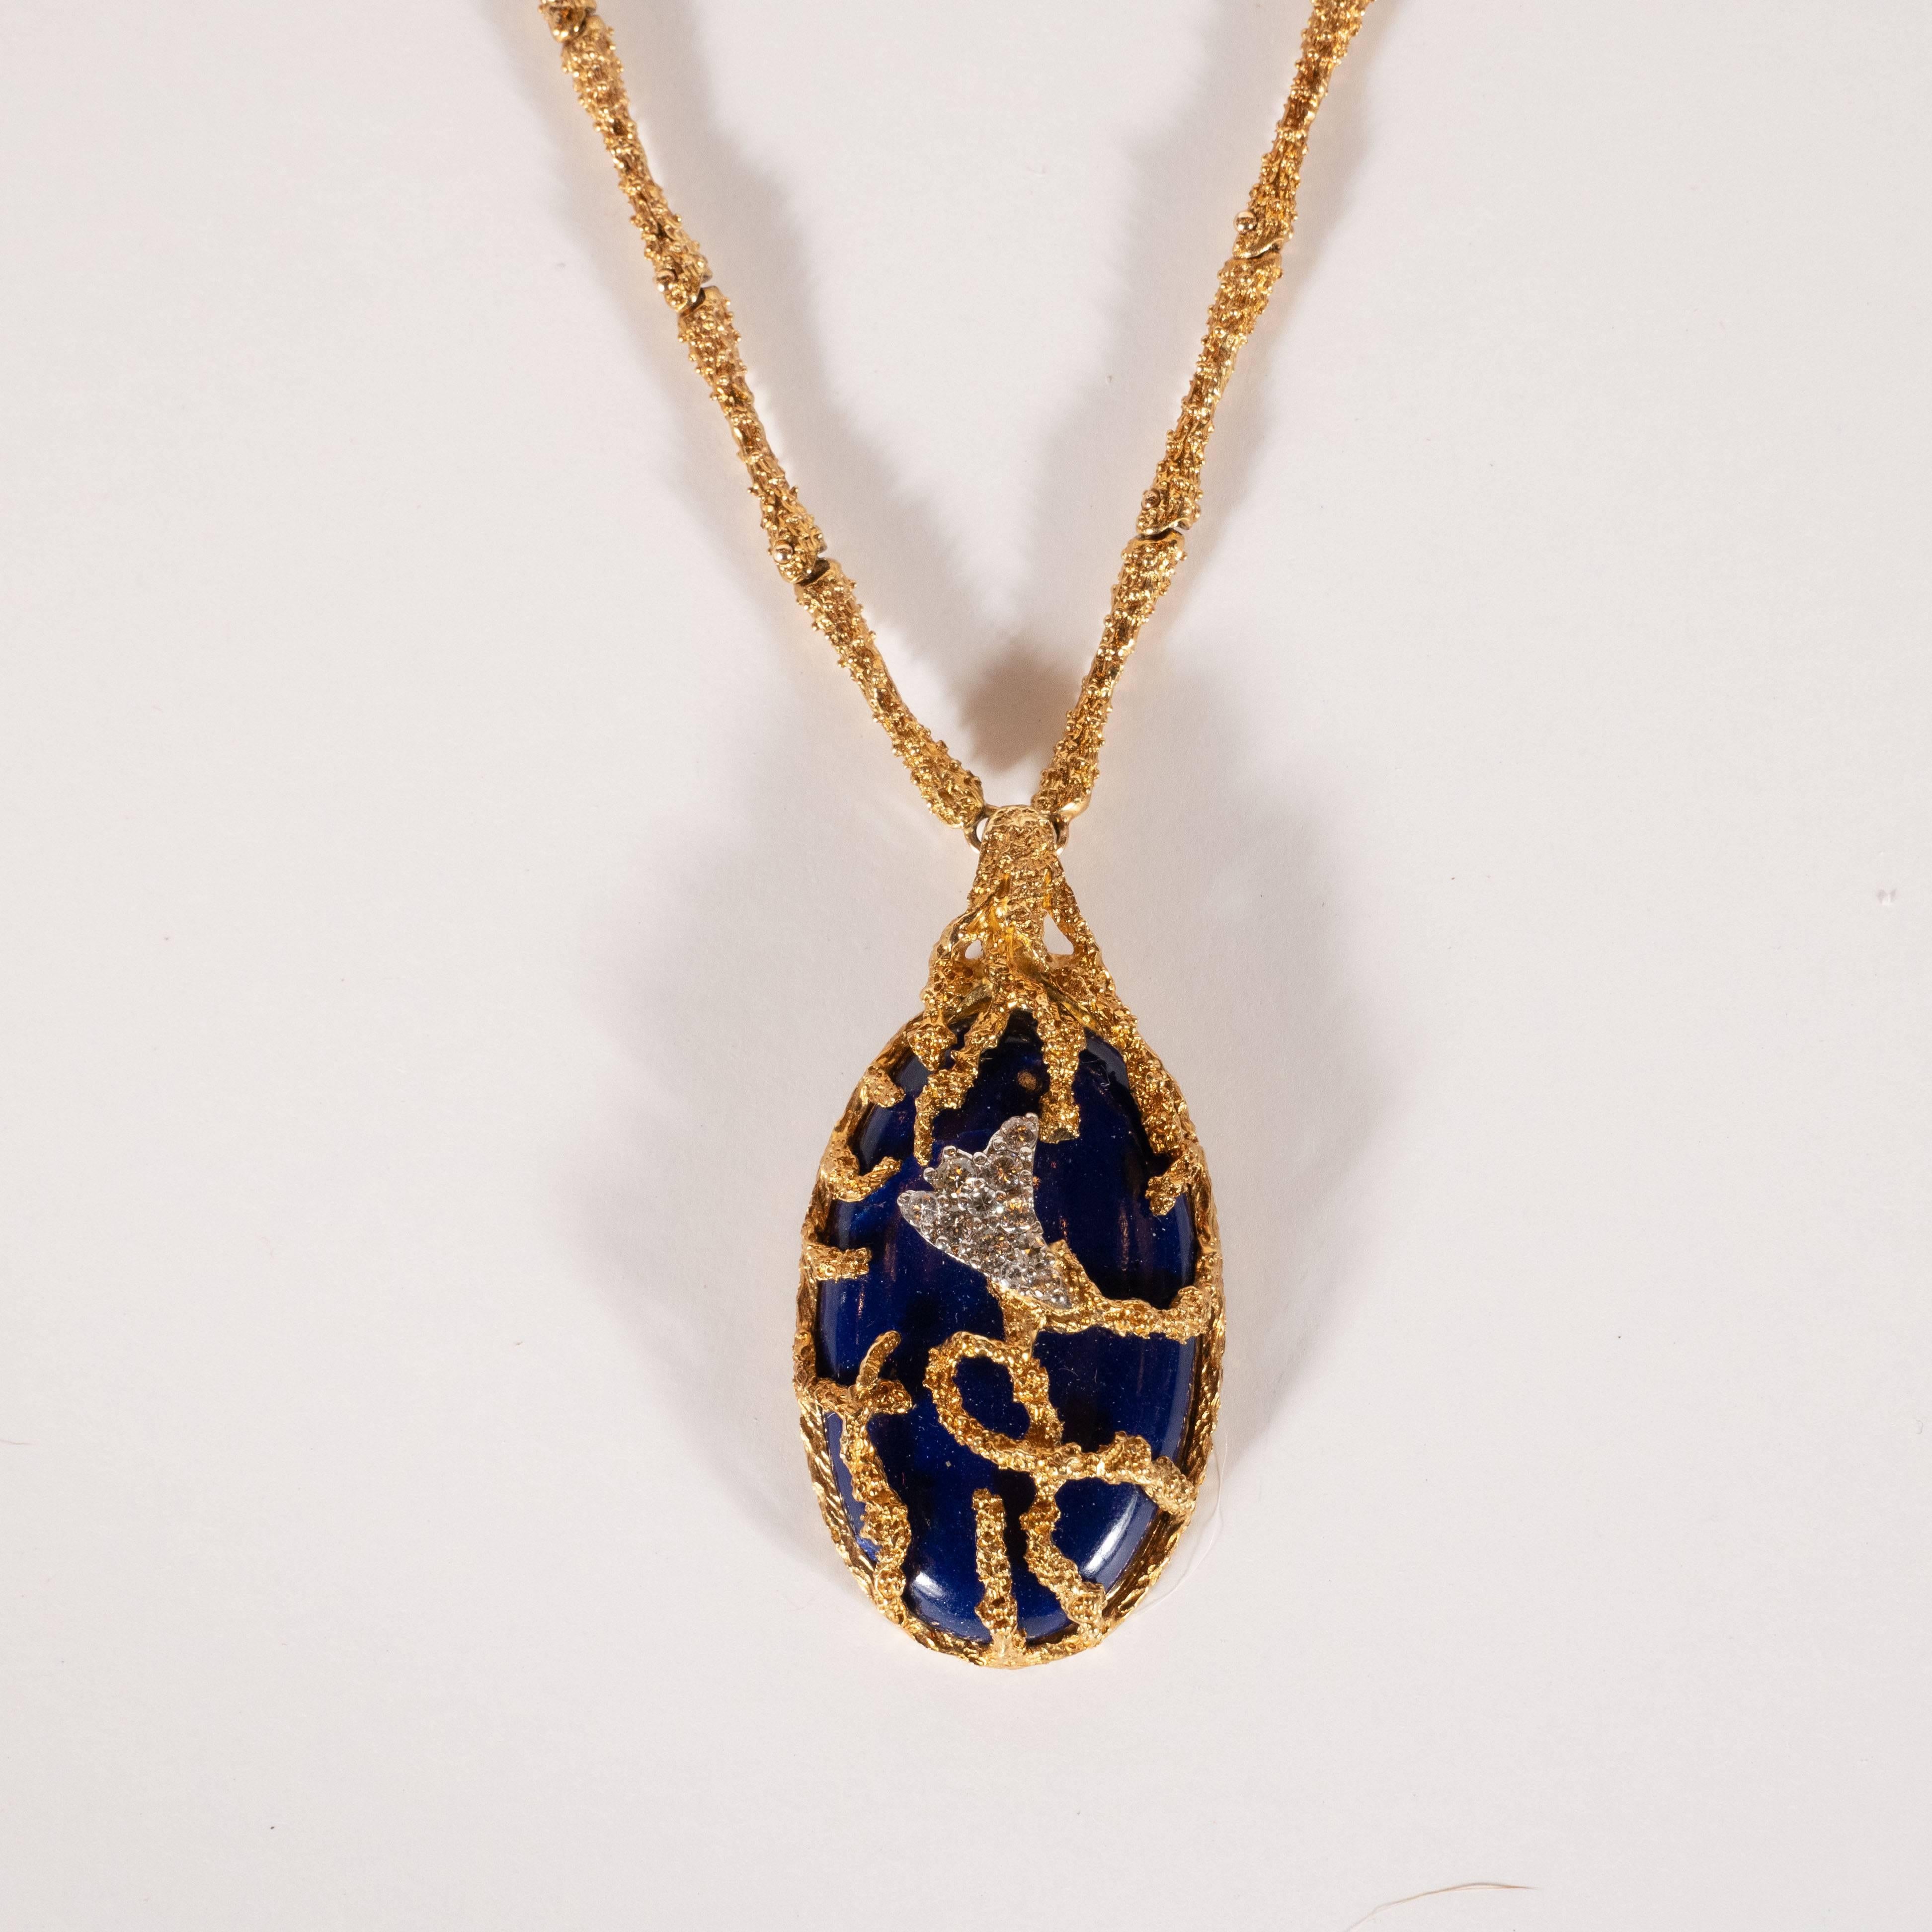 This stunning necklace was hand crafted by the esteemed French jewelry atelier, La Triomphe, circa 1970. It features a teardrop lapis circumscribed by textured 18k yellow gold resembling tendrils of elkhorn coral that ensconce the central stone. A